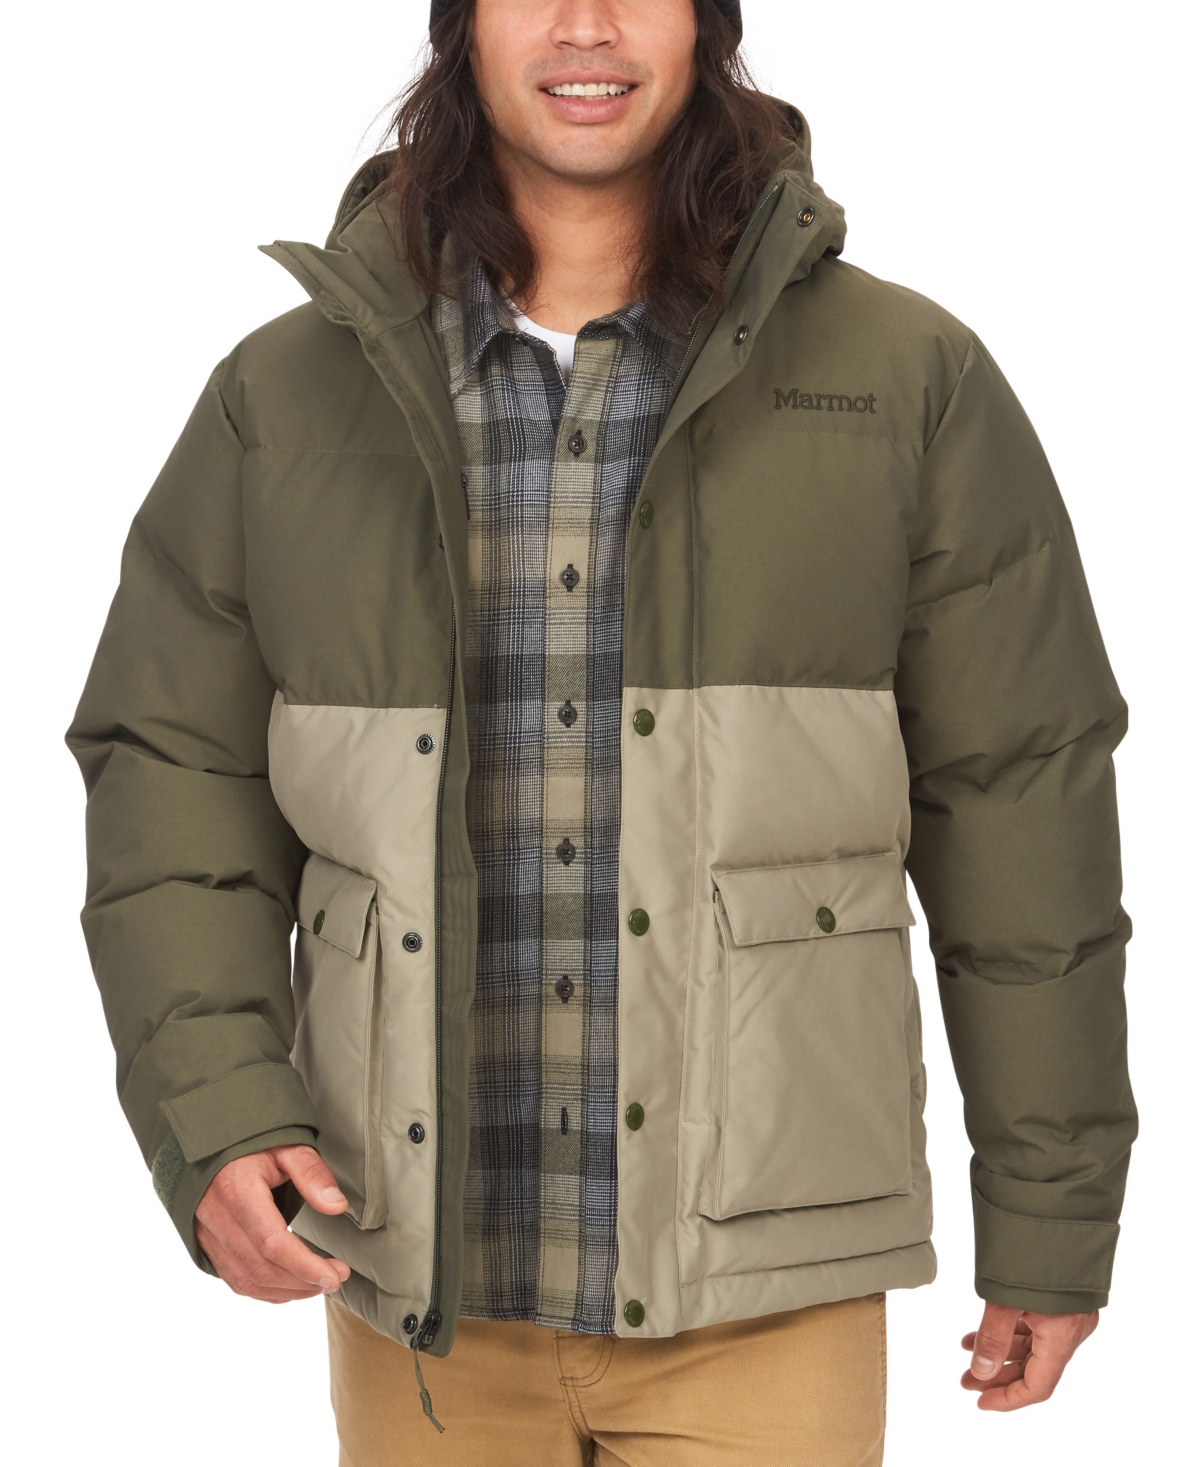 Men's Fordham Colorblocked Quilted Full-Zip Down Jacket with Zip-Off Hood - Nori/vetiver